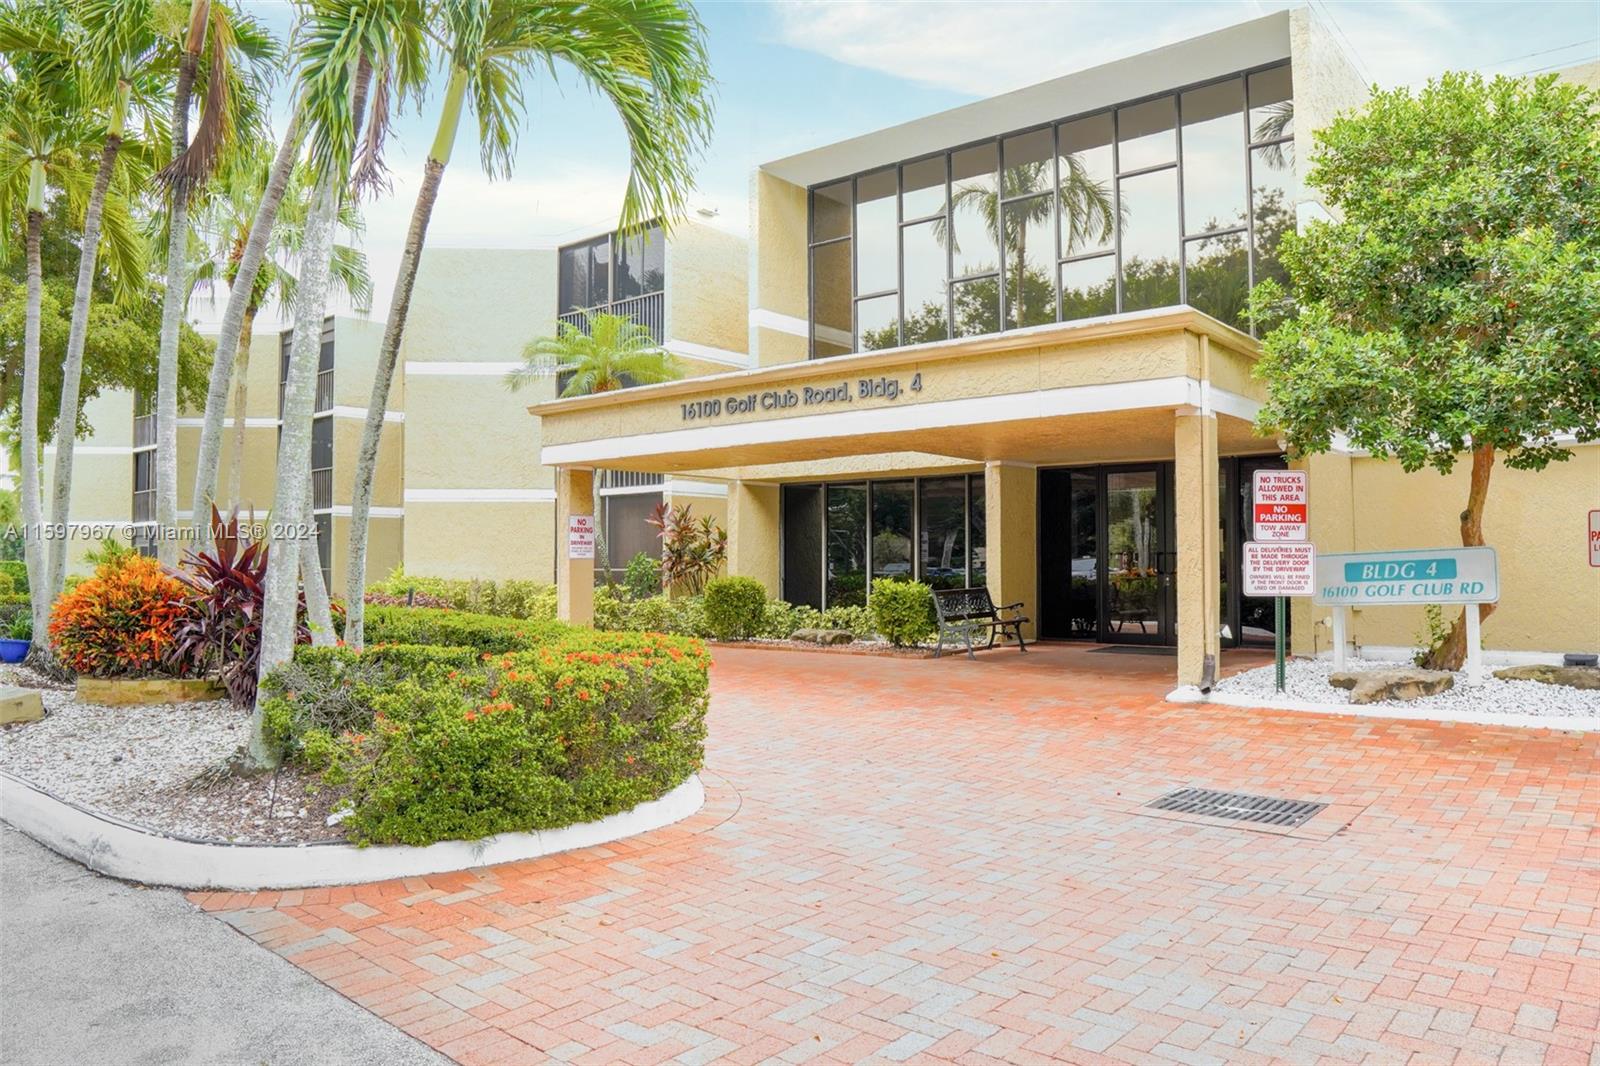 Amazing split unit apartment in the heart of Bonaventure in Weston.  Required membership to the Bonaventure Town Center  for an annual fee with seller willing to negotiate first year of such membership with potential buyer with access to gym, recreational center and other amenities.  
This apartment building features a secure entrance with a locked lobby, ensuring privacy and safety for all residents adding a layer of security and peace of mind.
Unit is close by from the best schools in the county and is in one of the best livable cities in the state of Florida.  Easy access the I-75 and 595 Expressway.   Association fee of $696/month includes several utilities and reserves.  Any other details can be addressed at showing.  Perfect condition to move in.  Do not miss this opportunity!